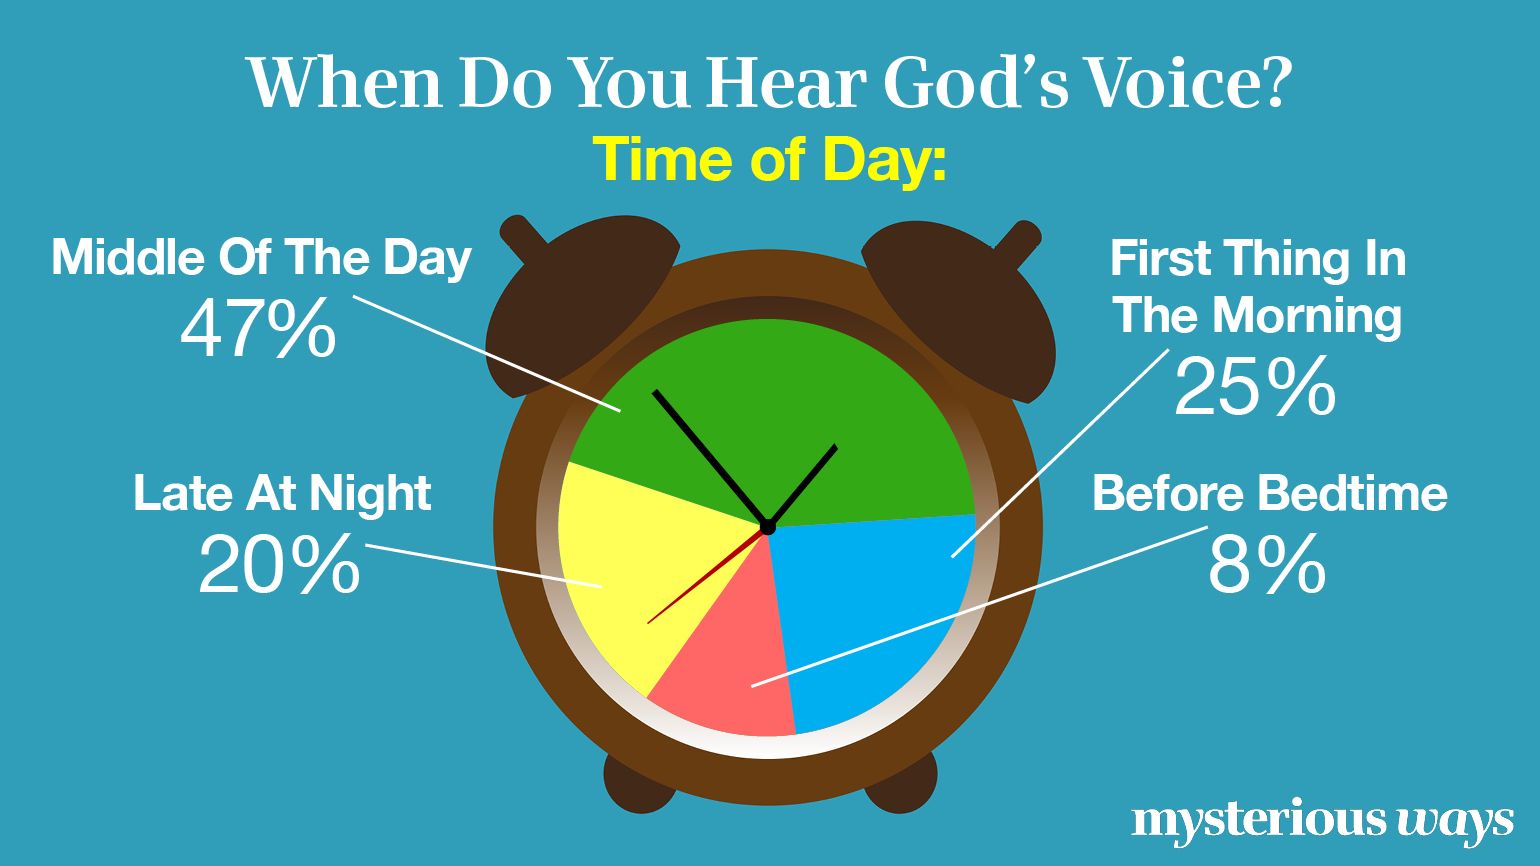 When Do You Hear God's Voice? Time of Day?